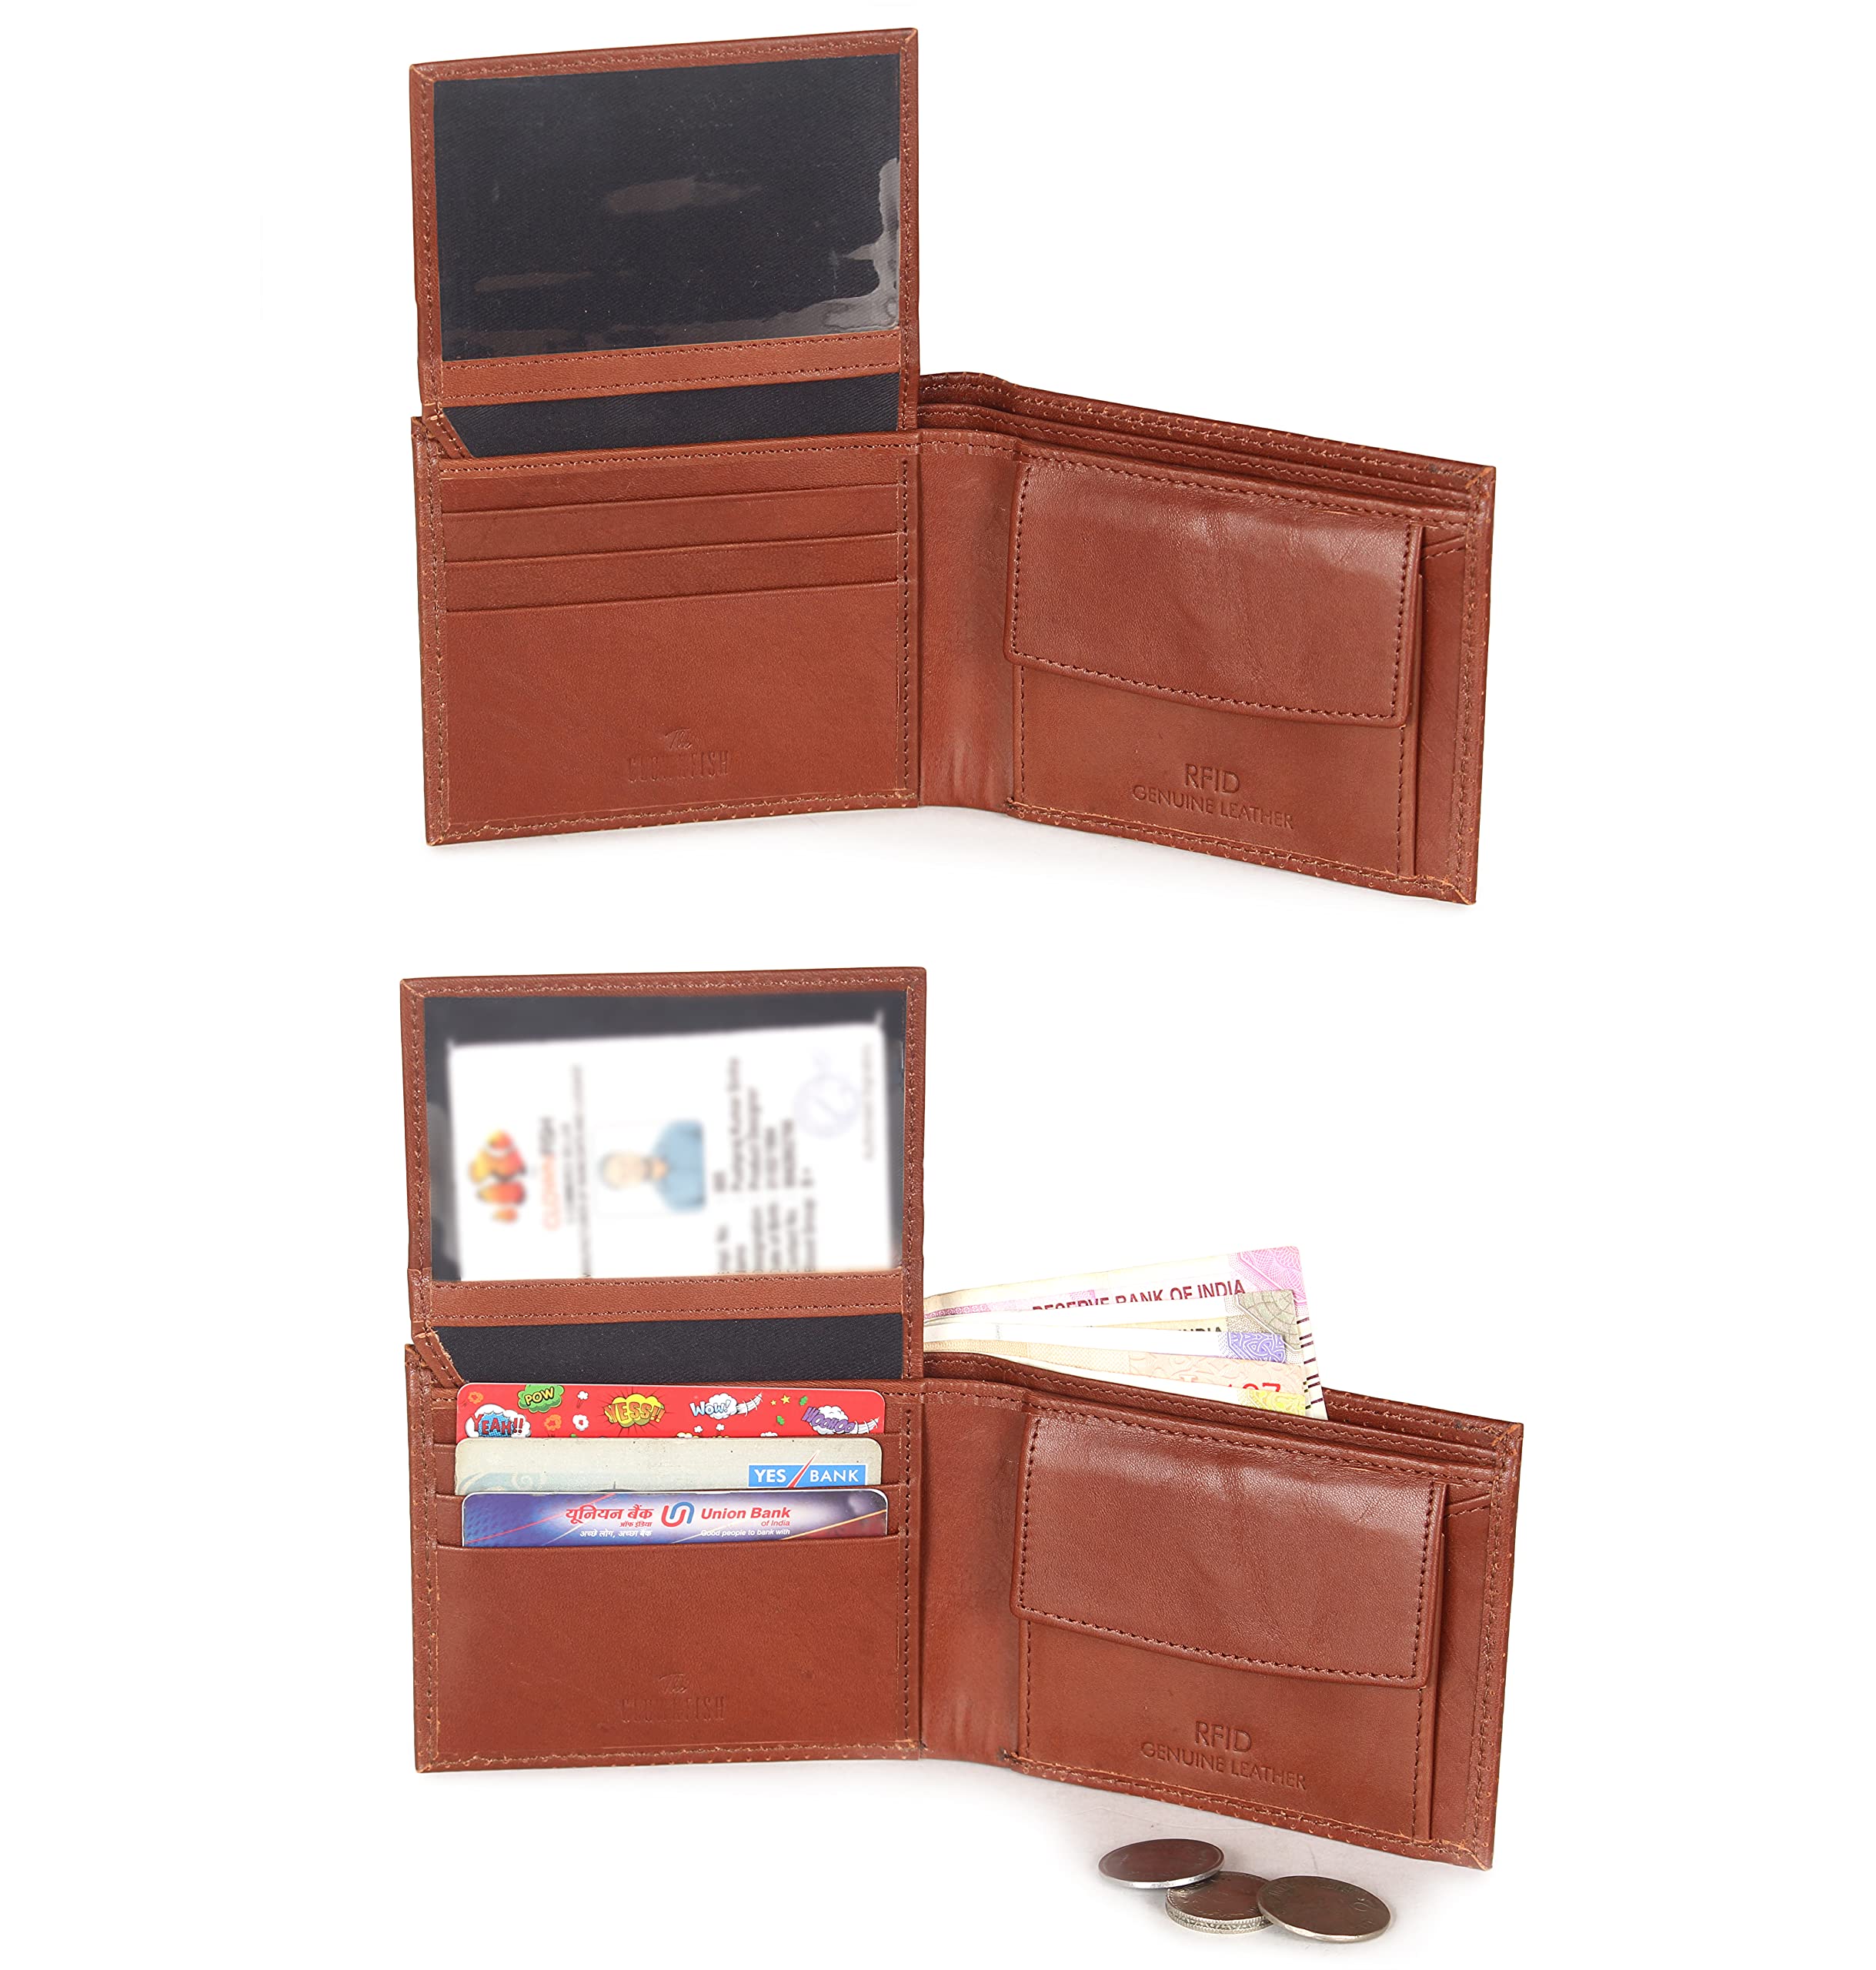 The Clownfish RFID Protected Genuine Leather Bi-Fold Wallet for Men with Multiple Card Slots, Coin Pocket & ID Window (Tan)